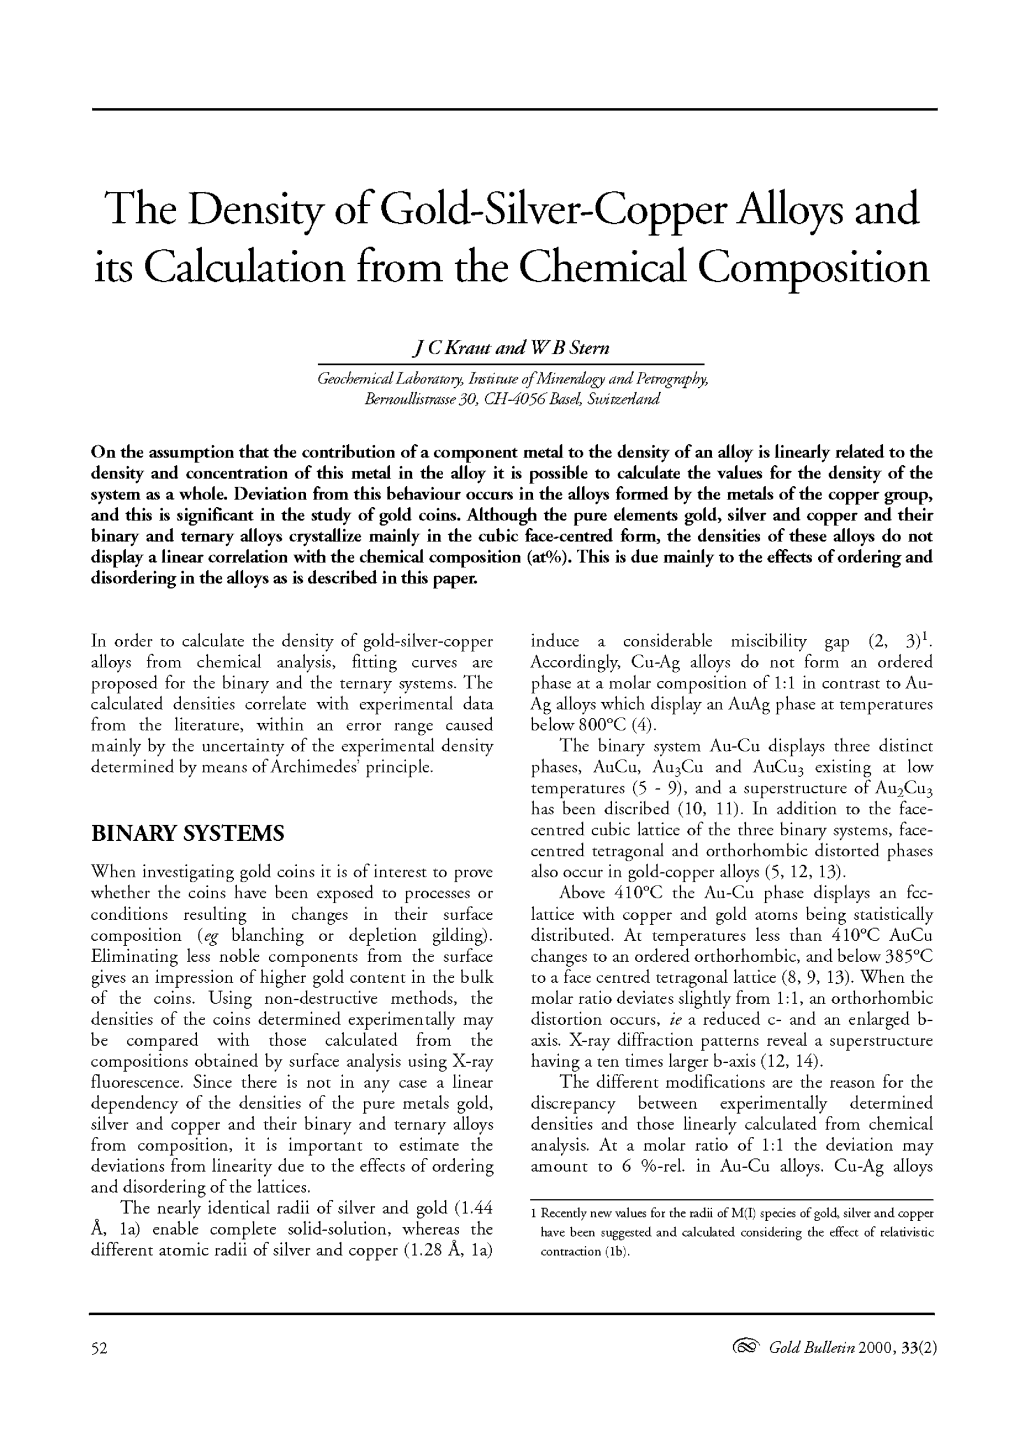 The Density of Gold-Silver-Copper Alloys and Its Calculation from The